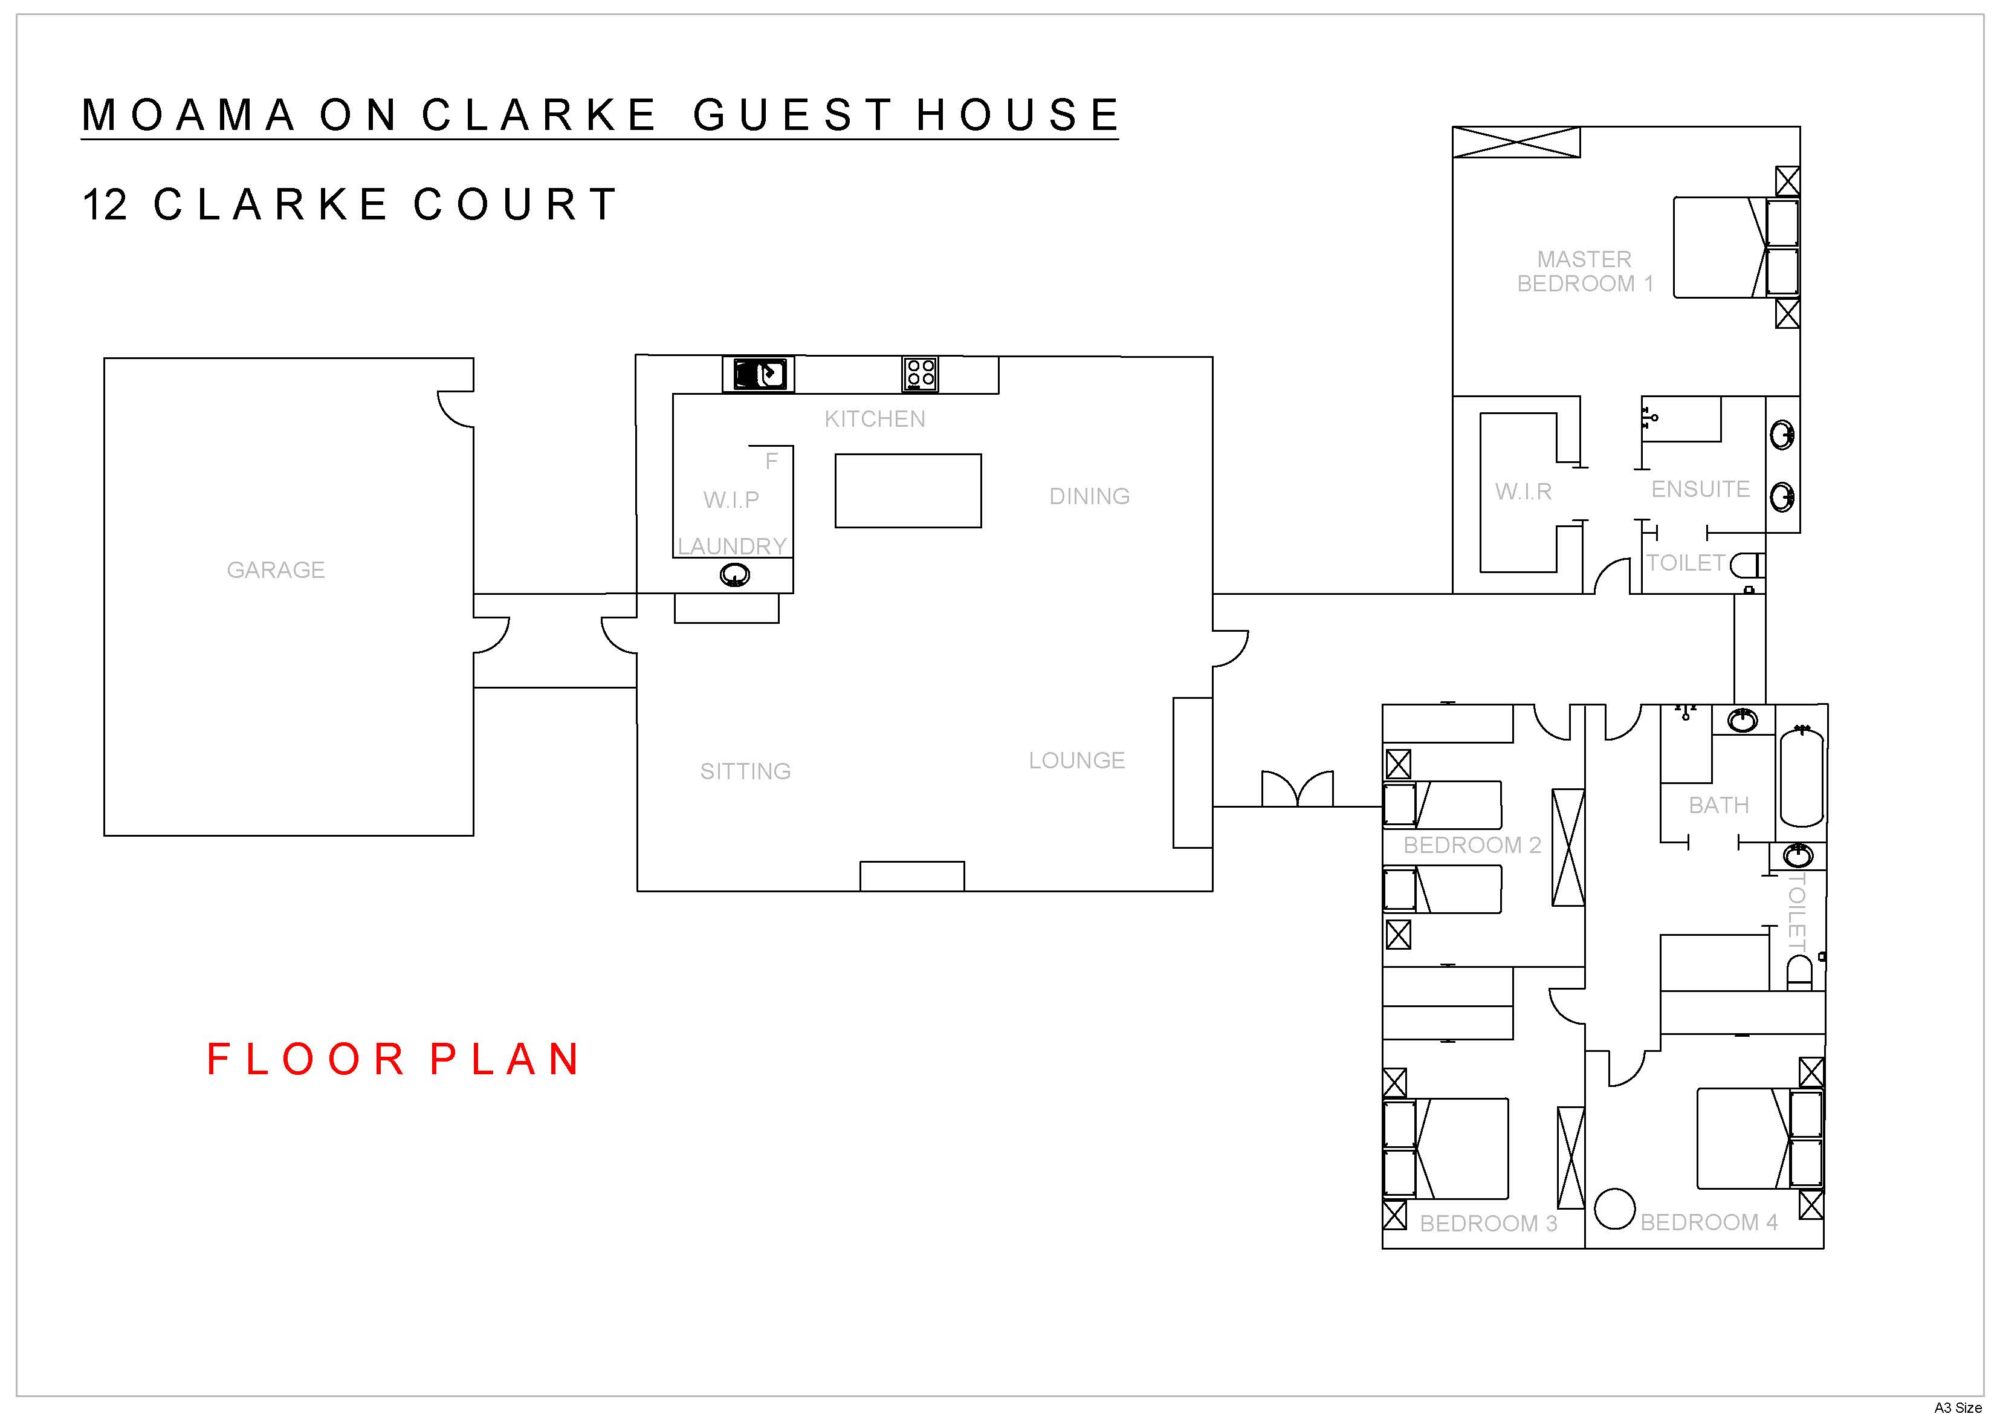 Moama on clarke guest house layout